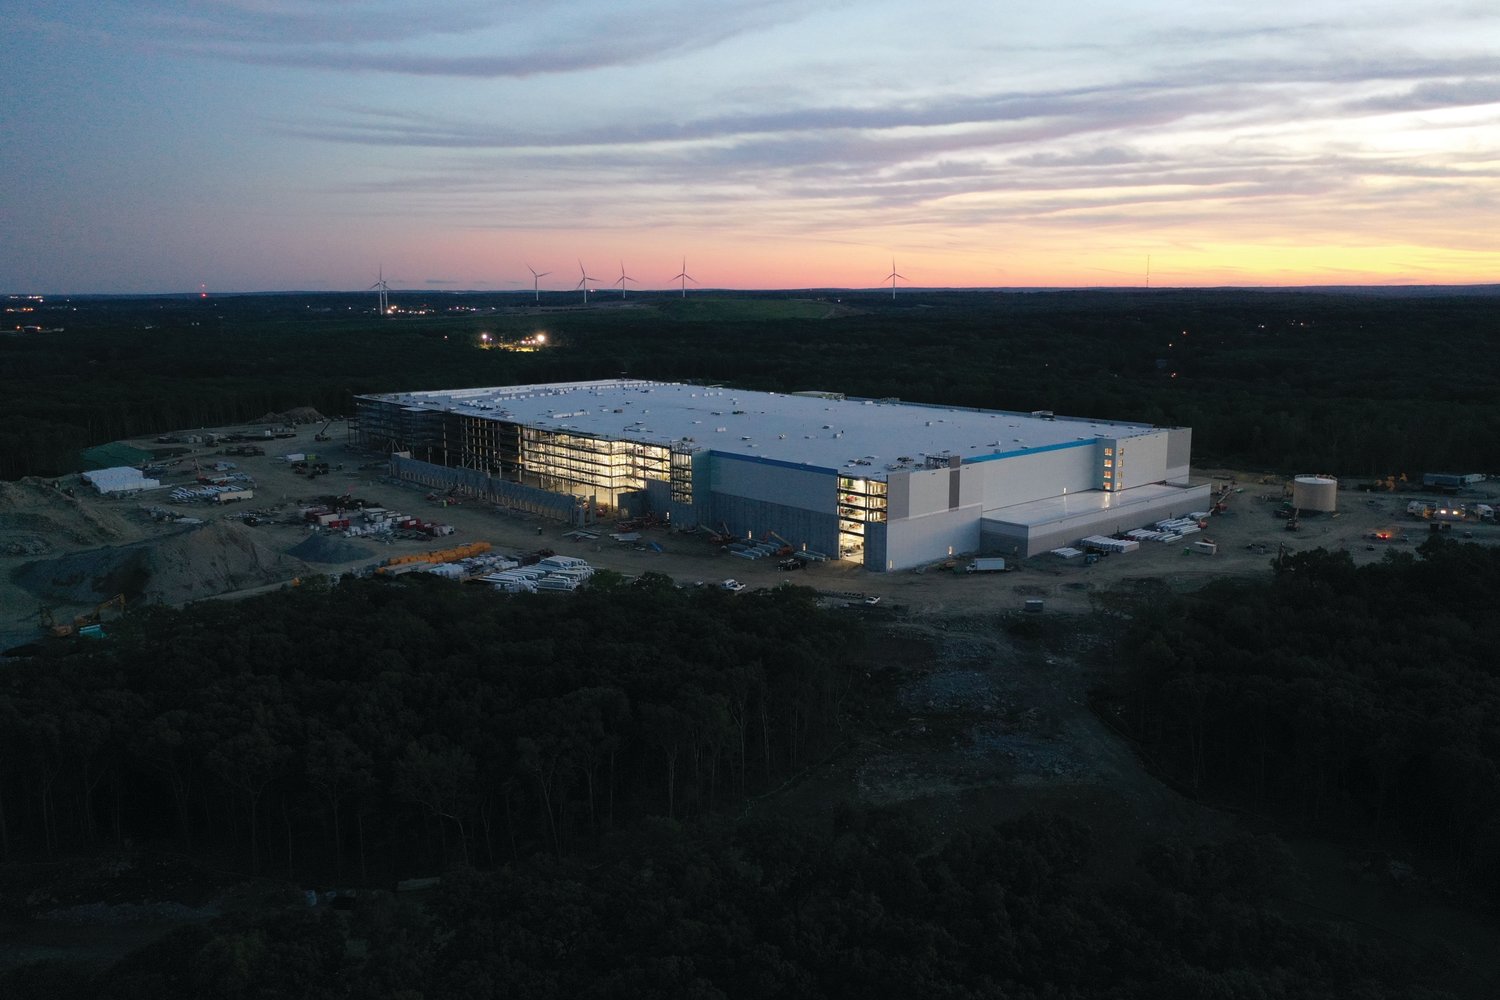 RIBBON CUTTING? According to Caitlin McLaughlin, Amazon Public Relations New England, the facility’s completion date is scheduled for the “second half of 2023.” The $290 million project is visible from points across the region, as crews work through the night.